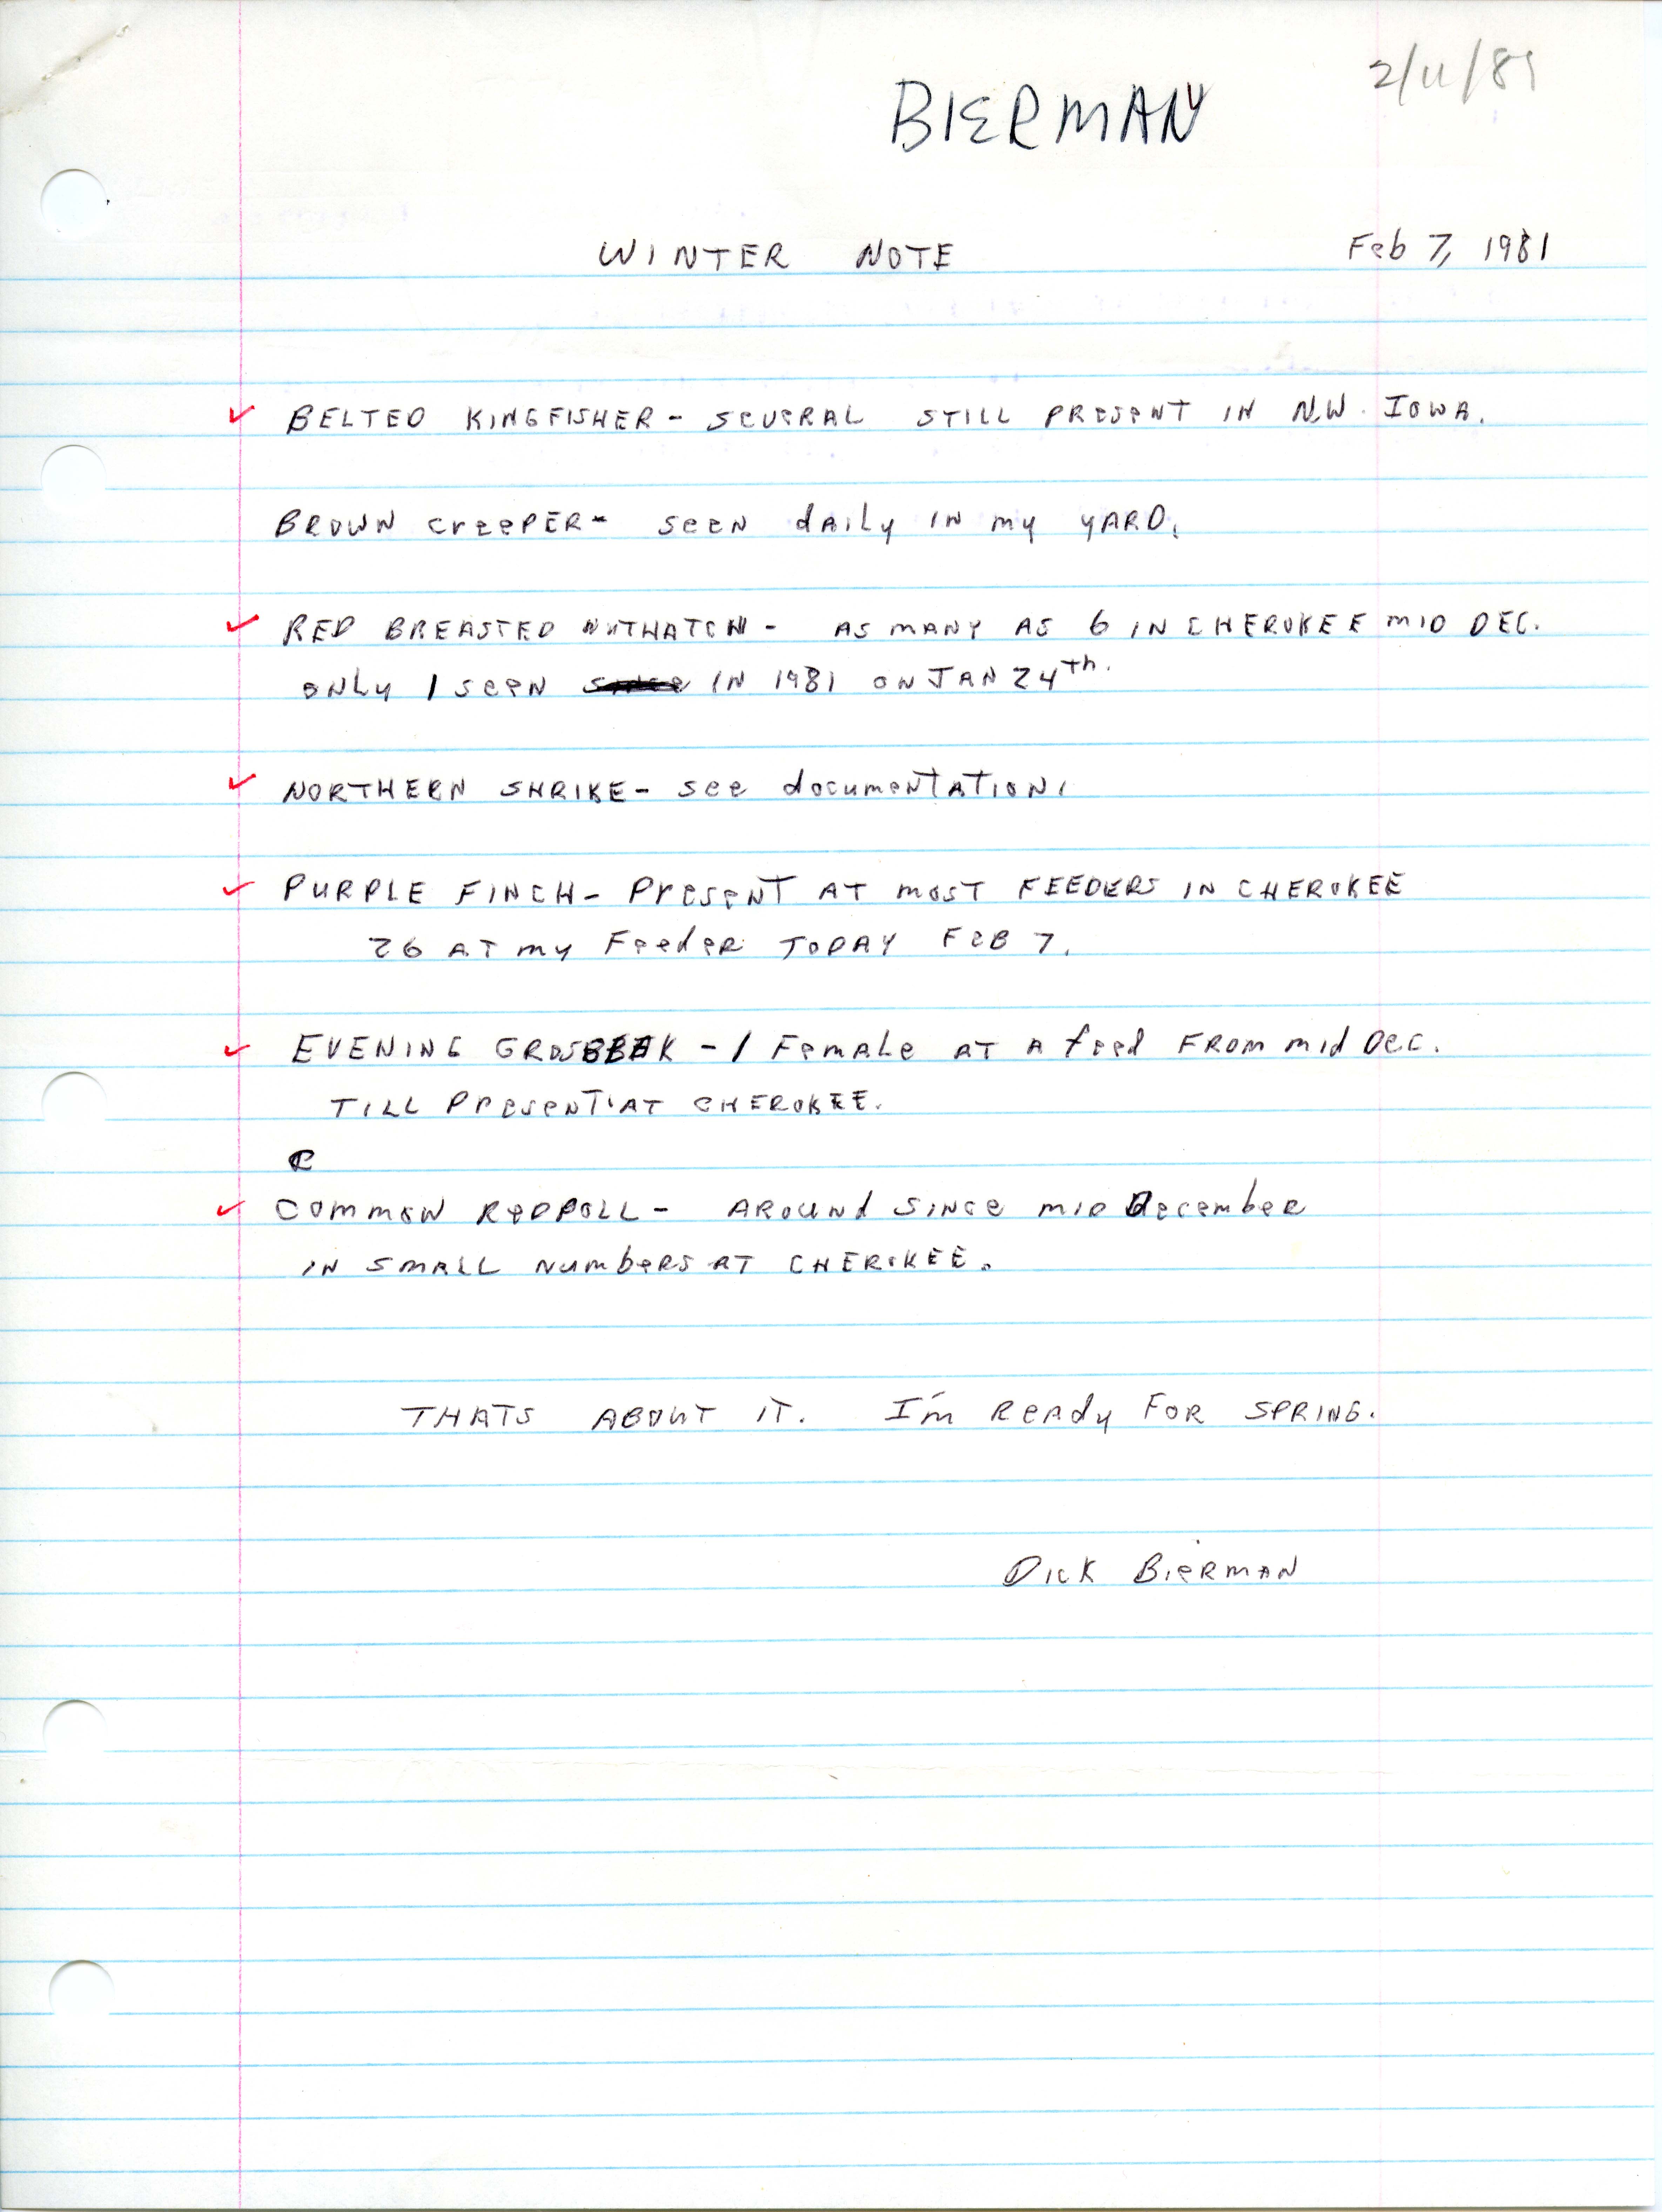 Winter note submitted by Dick Bierman, February 7,1981